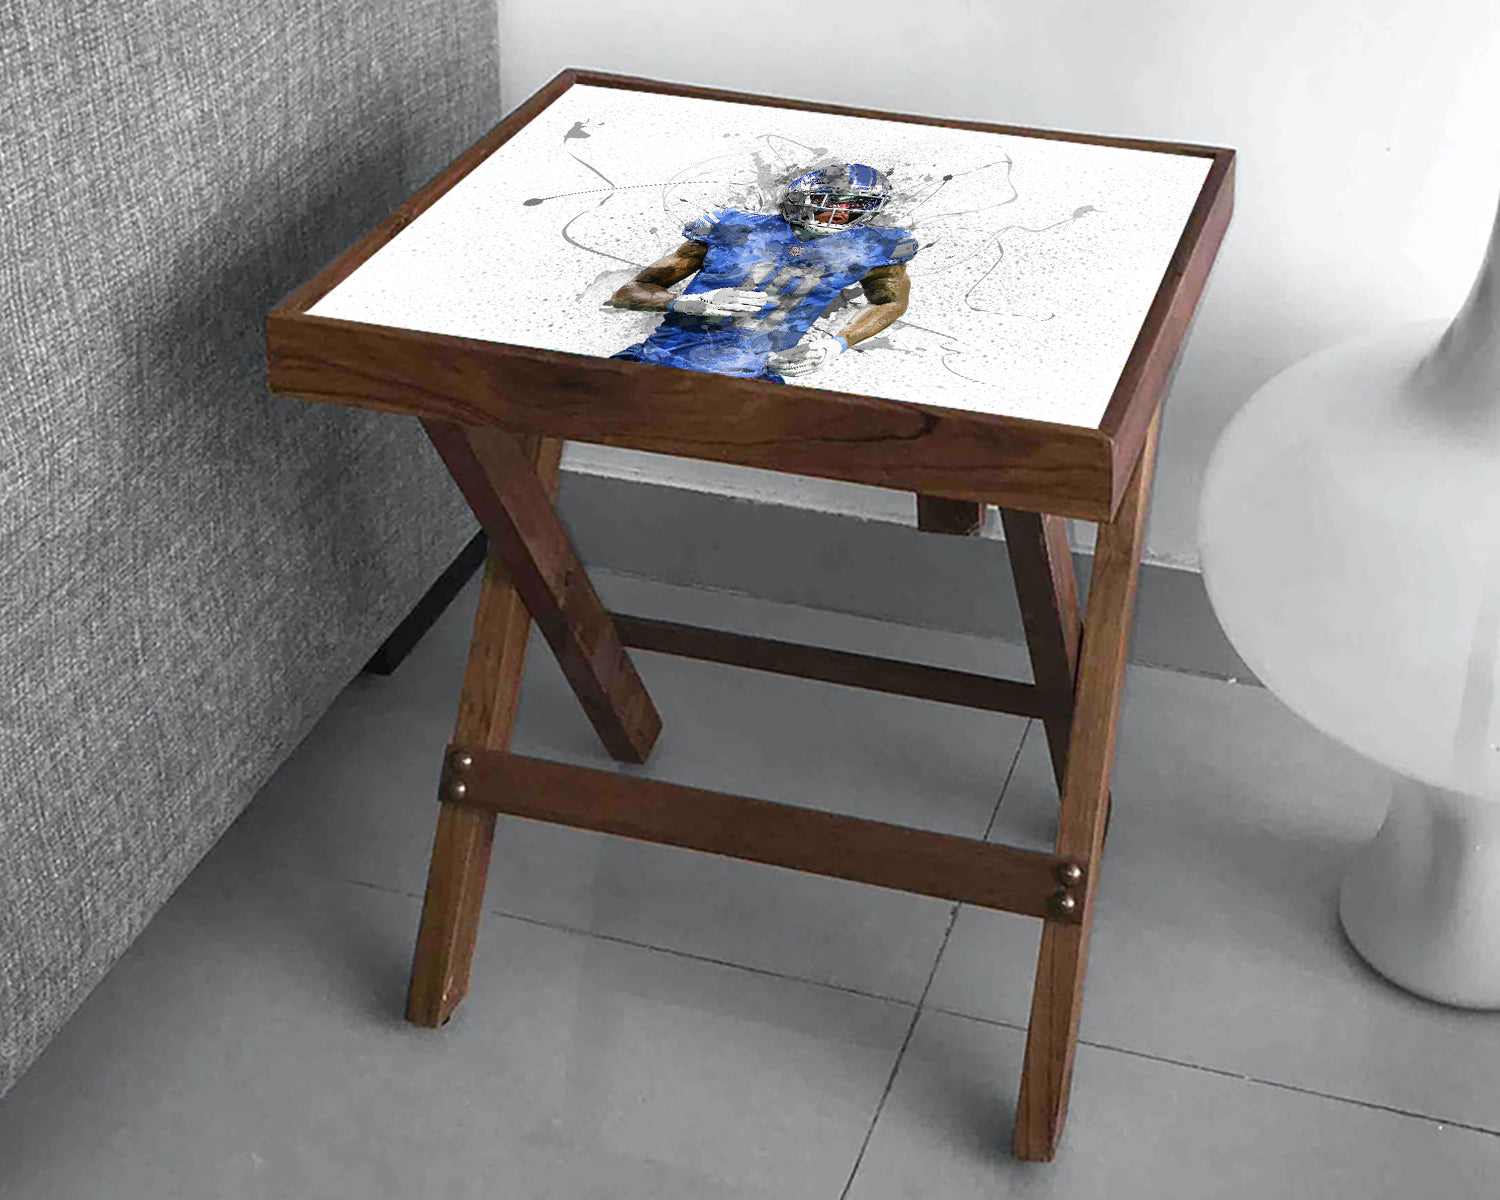 Kenny Golladay Splash Effect Coffee and Laptop Table 